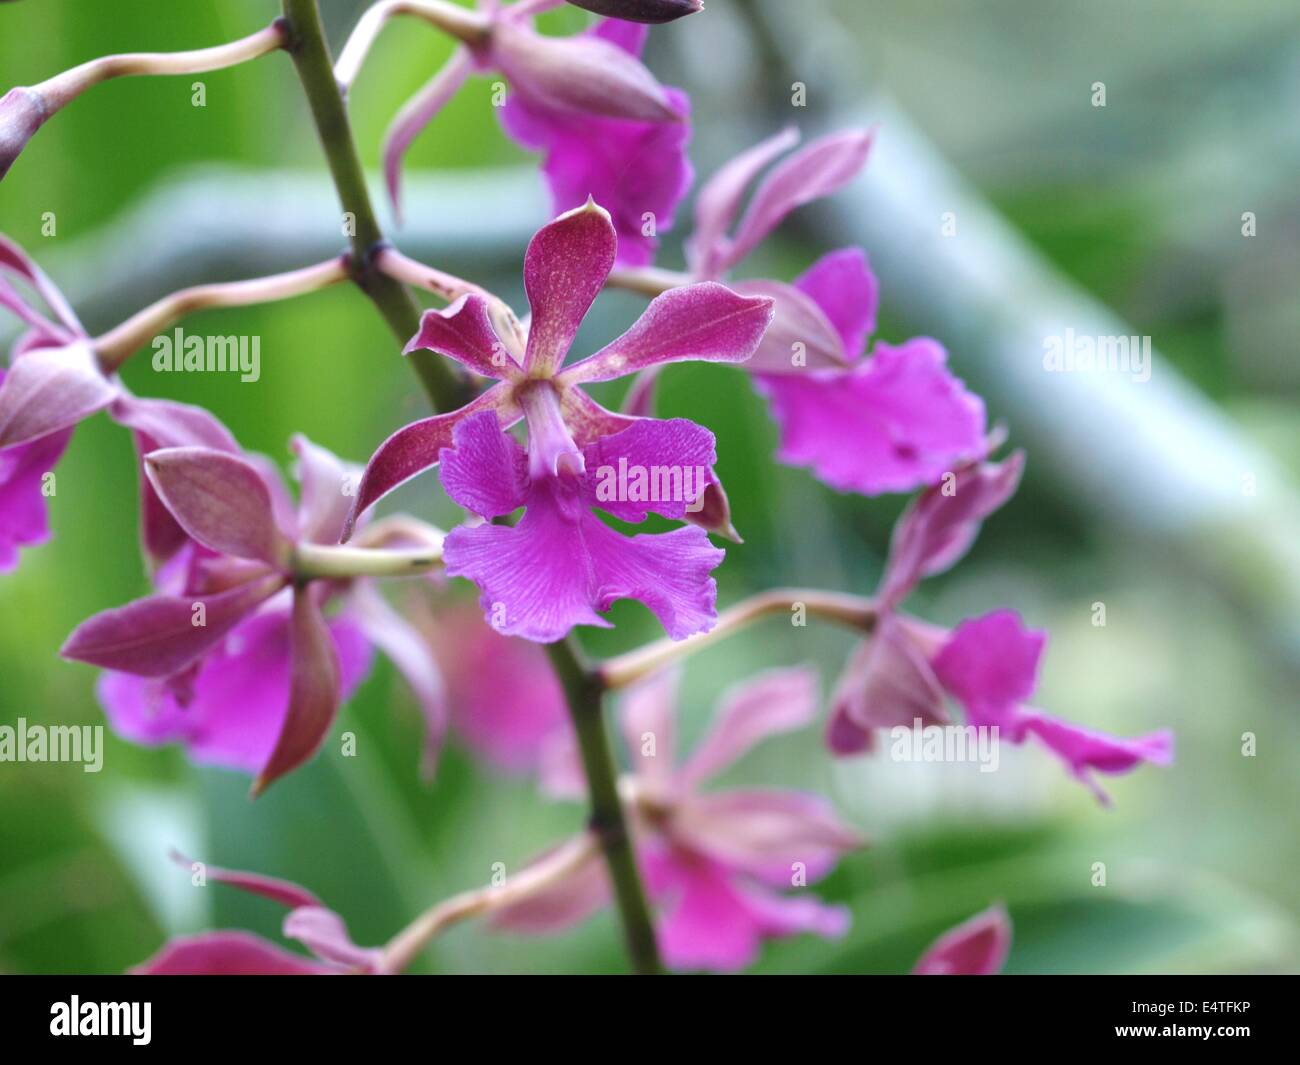 purple epidendrum orchid cluster Stock Photo